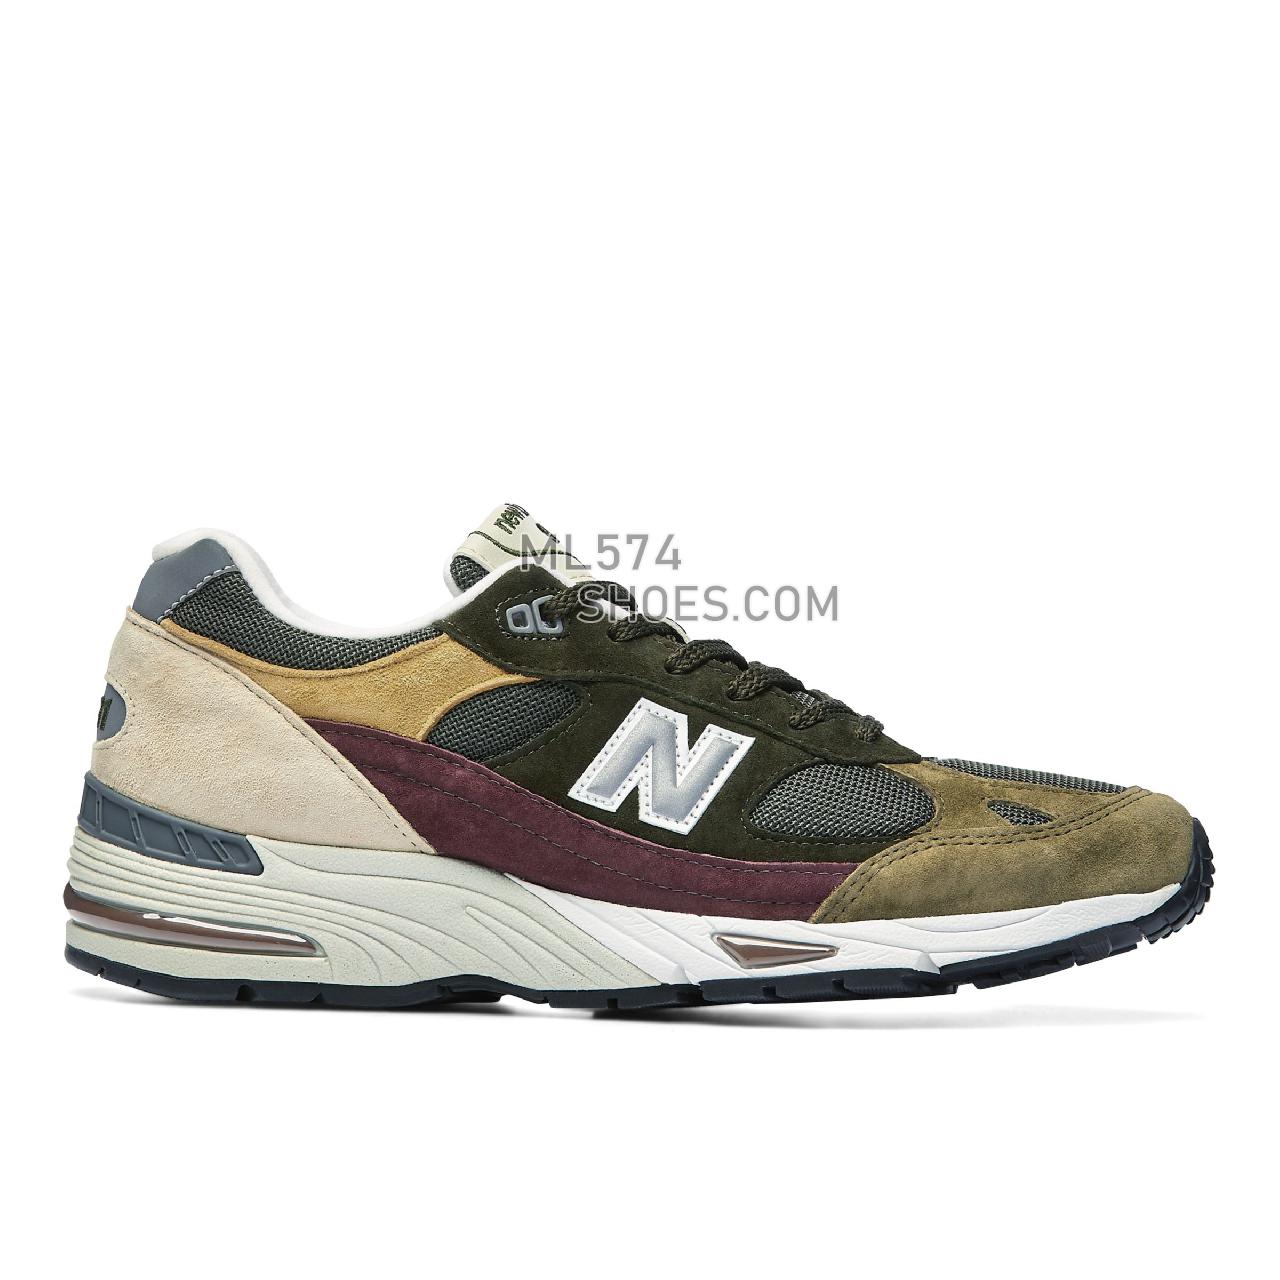 New Balance Made in UK 991 - Men's Made in USA And UK Sneakers - Green with Wine and Yellow - M991GYB